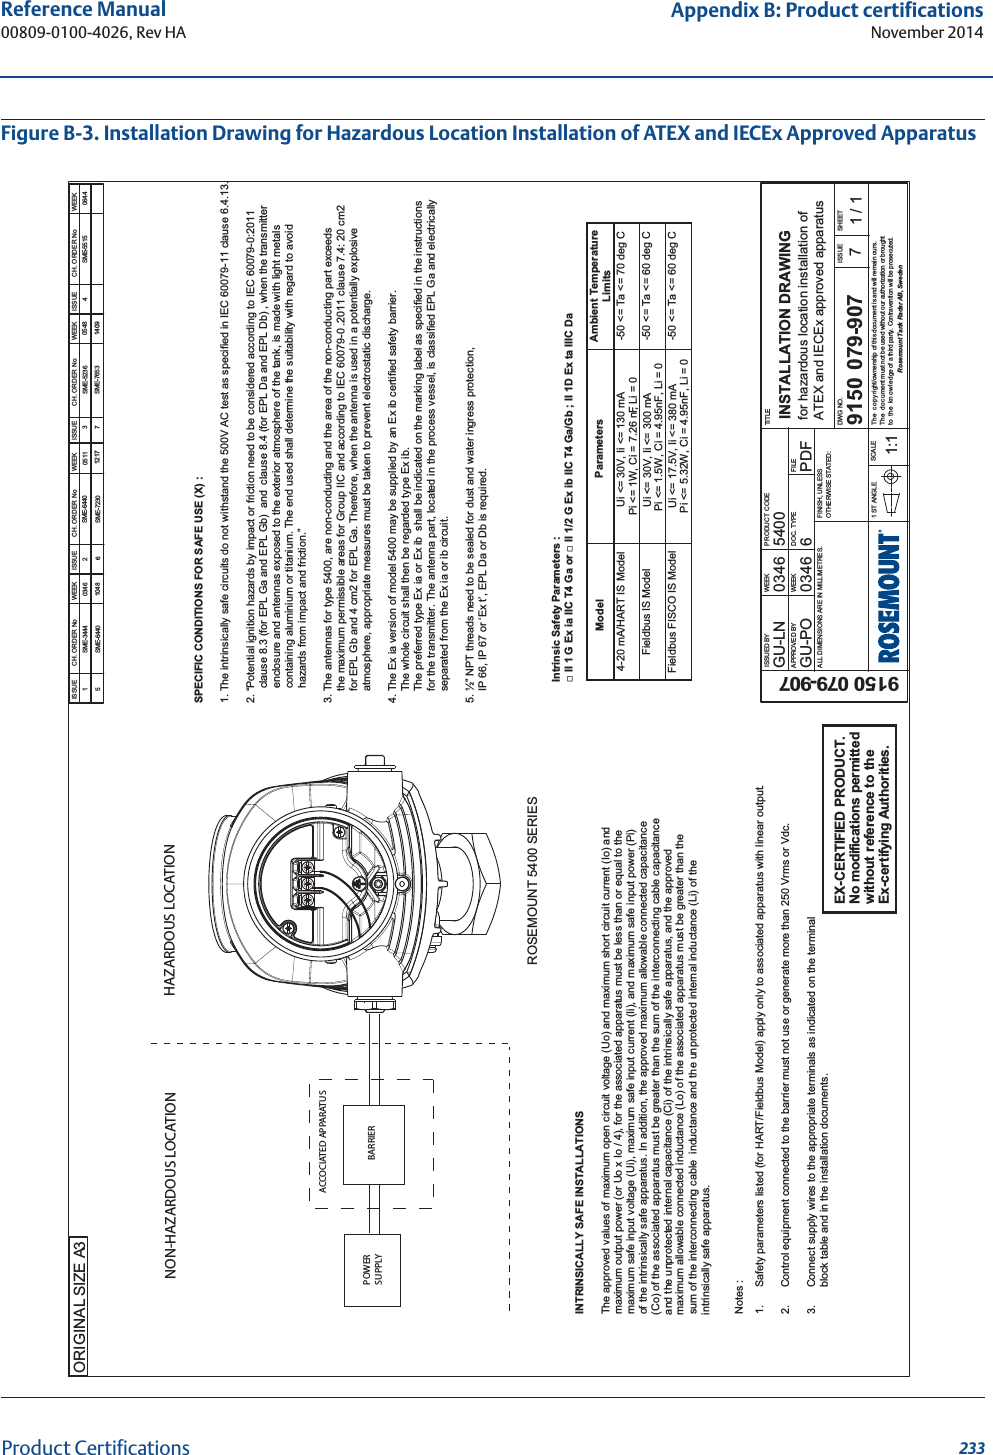 233Reference Manual 00809-0100-4026, Rev HAAppendix B: Product certificationsNovember 2014Product CertificationsFigure B-3. Installation Drawing for Hazardous Location Installation of ATEX and IECEx Approved ApparatusSME-3444   0346   1  ISSUE CH. ORDER No WEEK ISSUE CH. ORDER No WEEK ISSUE CH. ORDER No WEEK ISSUE CH. ORDER No WEEKA3ORIGINAL SIZEGU-LN03465400GU-PO 6 PDF9150 079-9079150 079-9070346 INSTALLATION DRAWINGfor hazardous location installation of ATEX and IECEx approved apparatus71 / 1ISSUED BYAPPROVED BYWEEKWEEKPRODUCT CODEDOC. TYPE FILETITLEDWG NO. ISSUE SHEETSCALE1:11 ST ANGLEFINISH, UNLESSOTHERWISE STATED:ALL DIMENSIONS ARE IN MILLIMETRES.The copyright/ownership of this document is and will remain ours.The document must not be used without our authorization or broughtto the knowledge of a third party. Contravention will be prosecuted. Rosemount Tank Radar AB, SwedenACCOCIATED APPARATUSBARRIERPOWERSUPPLYHAZARDOUS LOCATION  NON-HAZARDOUS LOCATION    ROSEMOUNT 5400 SERIESEX-CERTIFIED PRODUCT.No modifications permittedwithout reference to theEx-certifying Authorities.Intrinsic Safety Parameters :Ƒ,,*([LD,,&amp;7*DRUƑ,,*([LE,,&amp;7*D*E,,&apos;([WD,,,&amp;&apos;D     Model  Parameters  AmEient Temperature Limits 4-20 mA/HART IS Model  Ui &lt;= 30V, Ii &lt;= 130 mA  Pi &lt;= 1W, Ci = 7.26 nF, Li = 0  -50 &lt;= Ta &lt;= 70 deg C Fieldbus IS Model   Pi &lt;= 1.5W, Ci = 4.95nF, Li = 0  -50 &lt;= Ta &lt;= 60 deg C Fieldbus FISCO IS Model Pi &lt;= 5.32W, Ci = 4.95nF, Li = 0  -50 &lt;= Ta &lt;= 60 deg C  Ui &lt;= 30V, Ii &lt;= 300 mA Ui &lt;= 17.5V, Ii &lt;= 380 mA SME-644020511 3SME-5236 0548 4SME-5515 06445SME-6440 10486SME-723012177SME-76531409 INTRINSICALLY SAFE INSTALLATIONS   The approved values of maximum open circuit voltage (Uo) and maximum short circuit current (Io) and     maximum output power (or Uo x Io / 4), for the associated apparatus must be less than or equal to the     maximum safe input voltage (Ui), maximum safe input current (Ii), and maximum safe input power (Pi)   of the intrinsically safe apparatus. In addition, the approved maximum allowable connected capacitance  (Co) of the associated apparatus must be greater than the sum of the interconnecting cable capacitance and the unprotected internal capacitance (Ci) of the intrinsically safe apparatus, and the approved    maximum allowable connected inductance (Lo) of the associated apparatus must be greater than the   sum of the interconnecting cable  inductance and the unprotected internal inductance (Li) of the intrinsically safe apparatus.     Notes :       1.      Safety parameters listed (for HART/Fieldbus Model) apply only to associated apparatus with linear output. 2.      Control equipment connected to the barrier must not use or generate more than 250 Vrms or Vdc.3.      Connect supply wires to the appropriate terminals as indicated on the terminal         block table and in the installation documents.SPECIFIC CONDITIONS FOR SAFE USE (X) :1. The intrinsically safe circuits do not withstand the 500V AC test as specified in IEC 60079-11 clause 6.4.13. 2. “Potential ignition hazards by impact or friction need to be considered according to IEC 60079-0:2011      clause 8.3 (for EPL Ga and EPL Gb)  and  clause 8.4 (for EPL Da and EPL Db) , when the transmitter      enclosure and antennas exposed to the exterior atmosphere of the tank, is made with light metals      containing aluminium or titanium. The end used shall determine the suitability with regard to avoid      hazards from impact and friction.” 3. The antennas for type 5400, are non-conducting and the area of the non-conducting part exceeds     the maximum permissible areas for Group IIC and according to IEC 60079-0 .2011 clause 7.4: 20 cm2     for EPL Gb and 4 cm2 for EPL Ga. Therefore, when the antenna is used in a potentially explosive     atmosphere, appropriate measures must be taken to prevent electrostatic discharge. 4. The Ex ia version of model 5400 may be supplied by an Ex ib certified safety barrier.     The whole circuit shall then be regarded type Ex ib.     The preferred type Ex ia or Ex ib  shall be indicated on the marking label as specified in the instructions     for the transmitter. The antenna part, located in the process vessel, is classified EPL Ga and electrically     separated from the Ex ia or ib circuit. 5. ½” NPT threads need to be sealed for dust and water ingress protection,     IP 66, IP 67 or ‘Ex t’, EPL Da or Db is required.